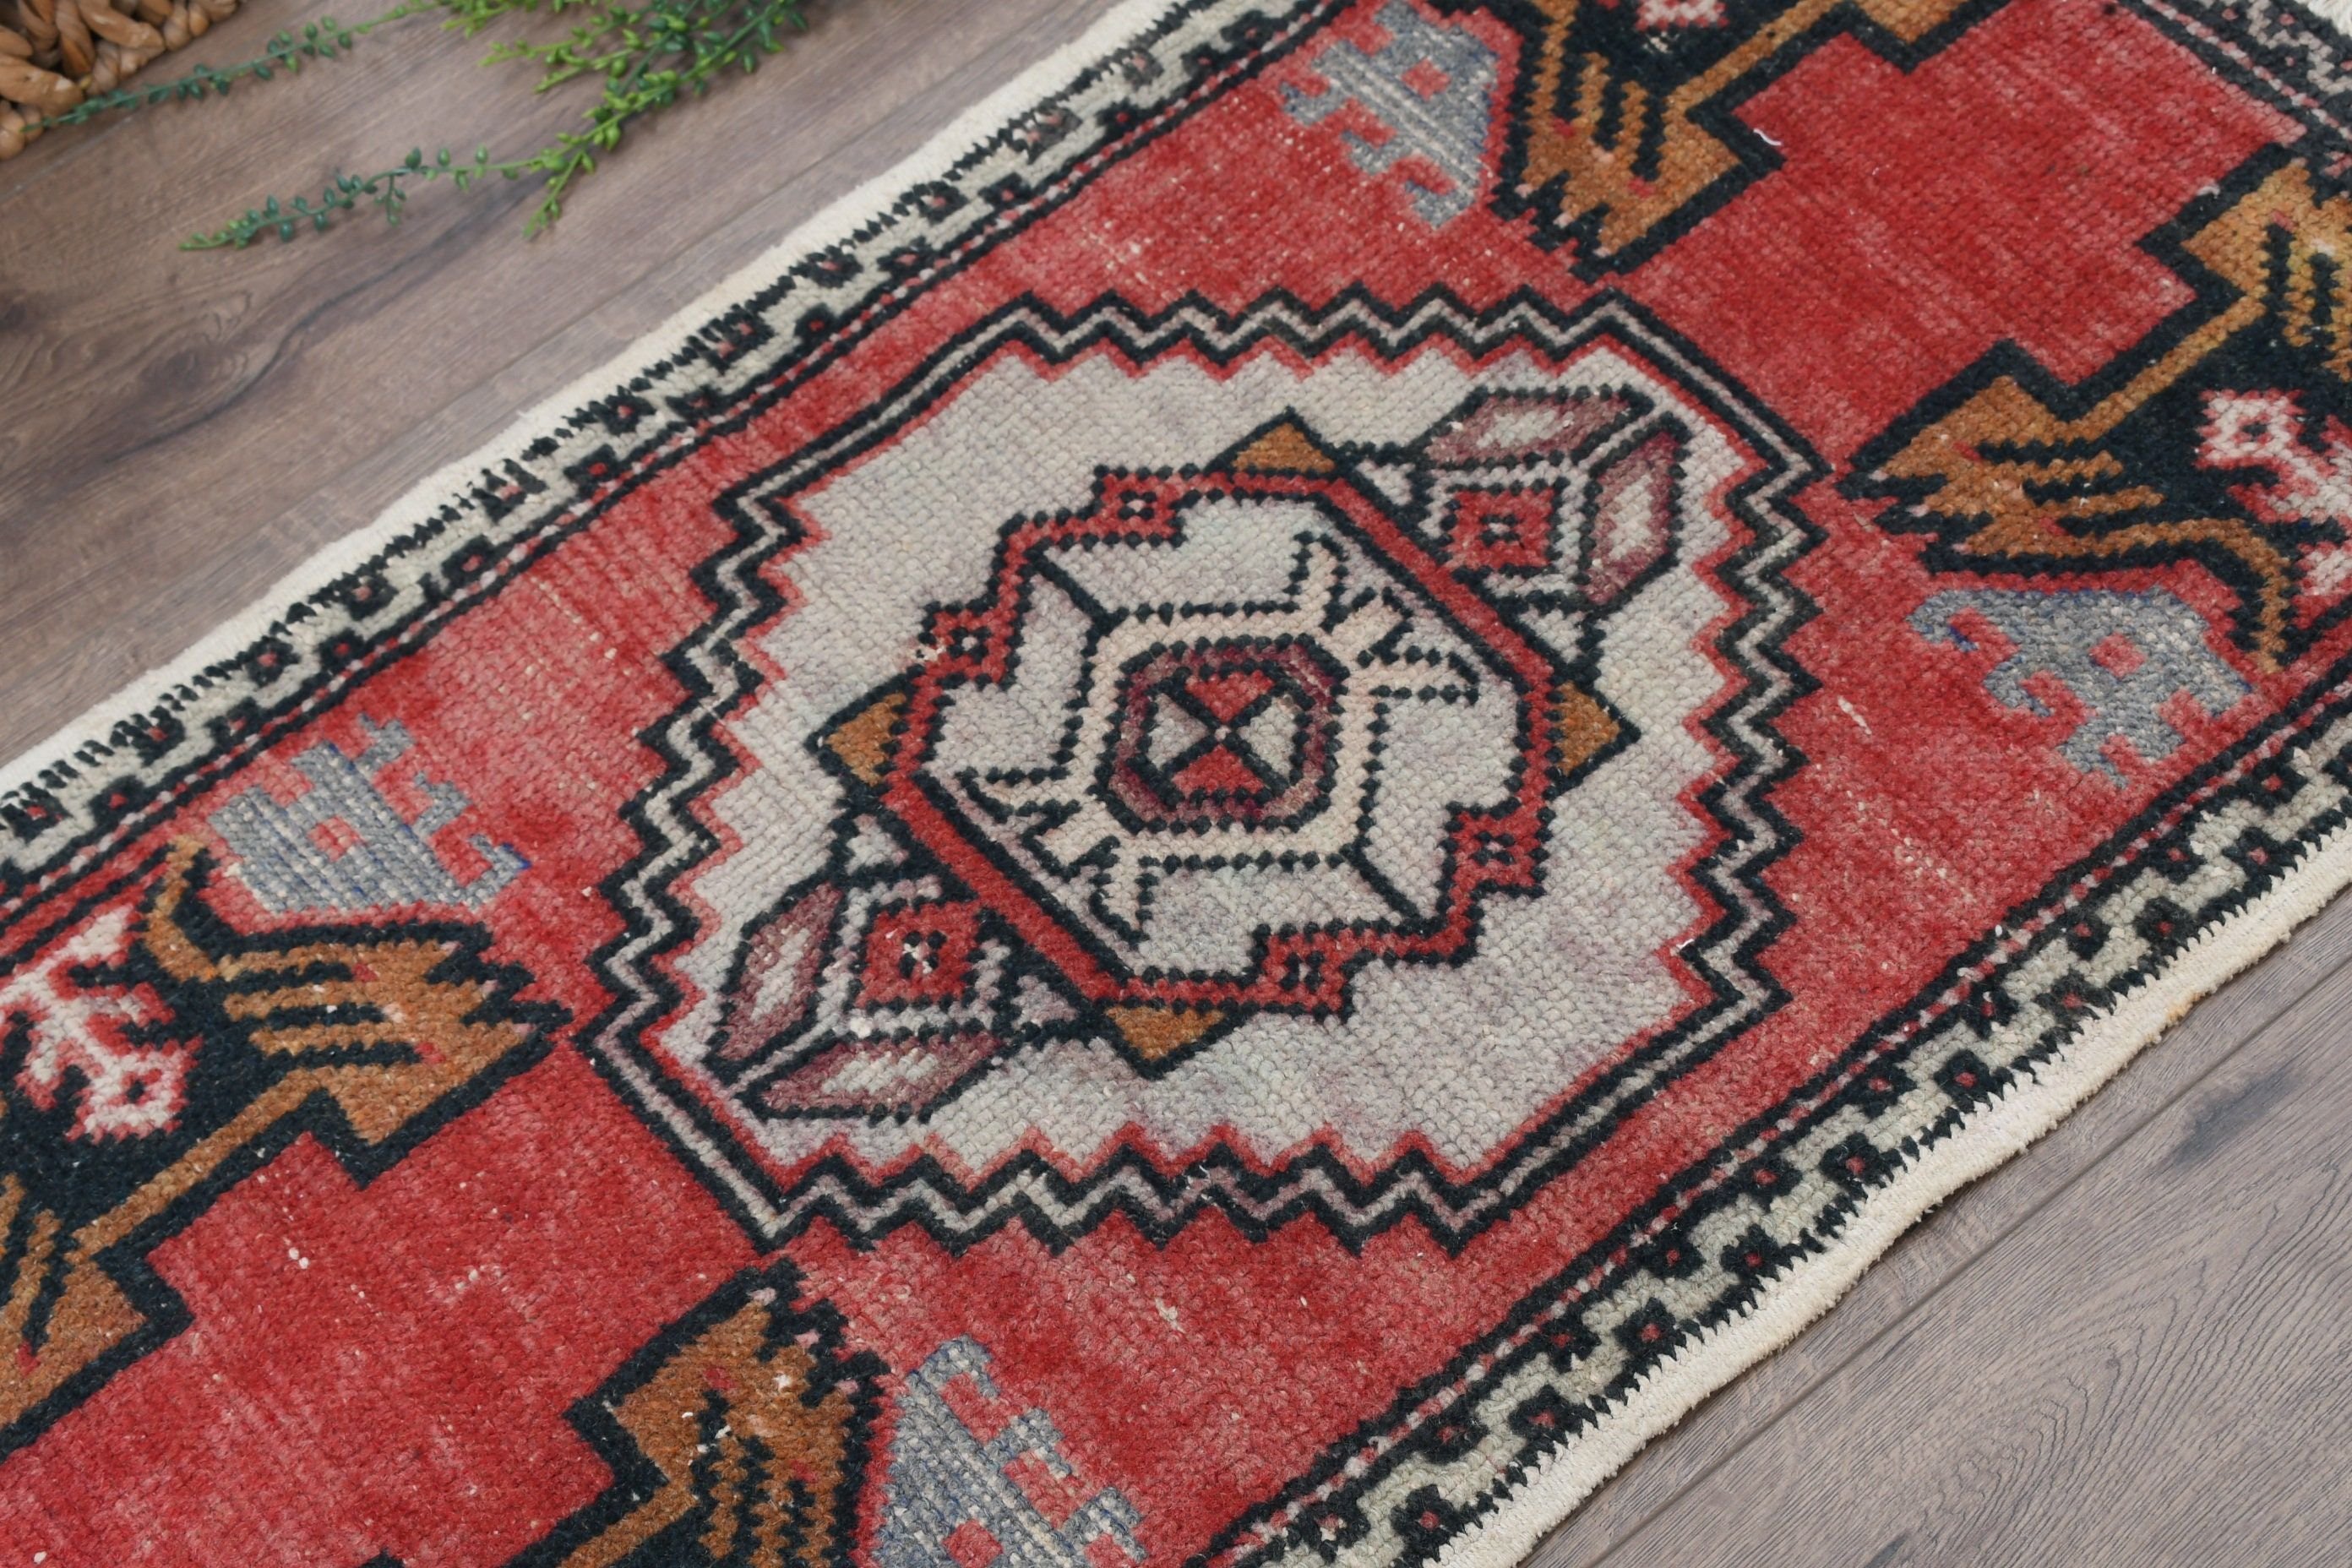 Red Wool Rugs, Vintage Rugs, Turkish Rug, Rugs for Door Mat, 1.7x3 ft Small Rug, Antique Rug, Wall Hanging Rug, Moroccan Rug, Car Mat Rug